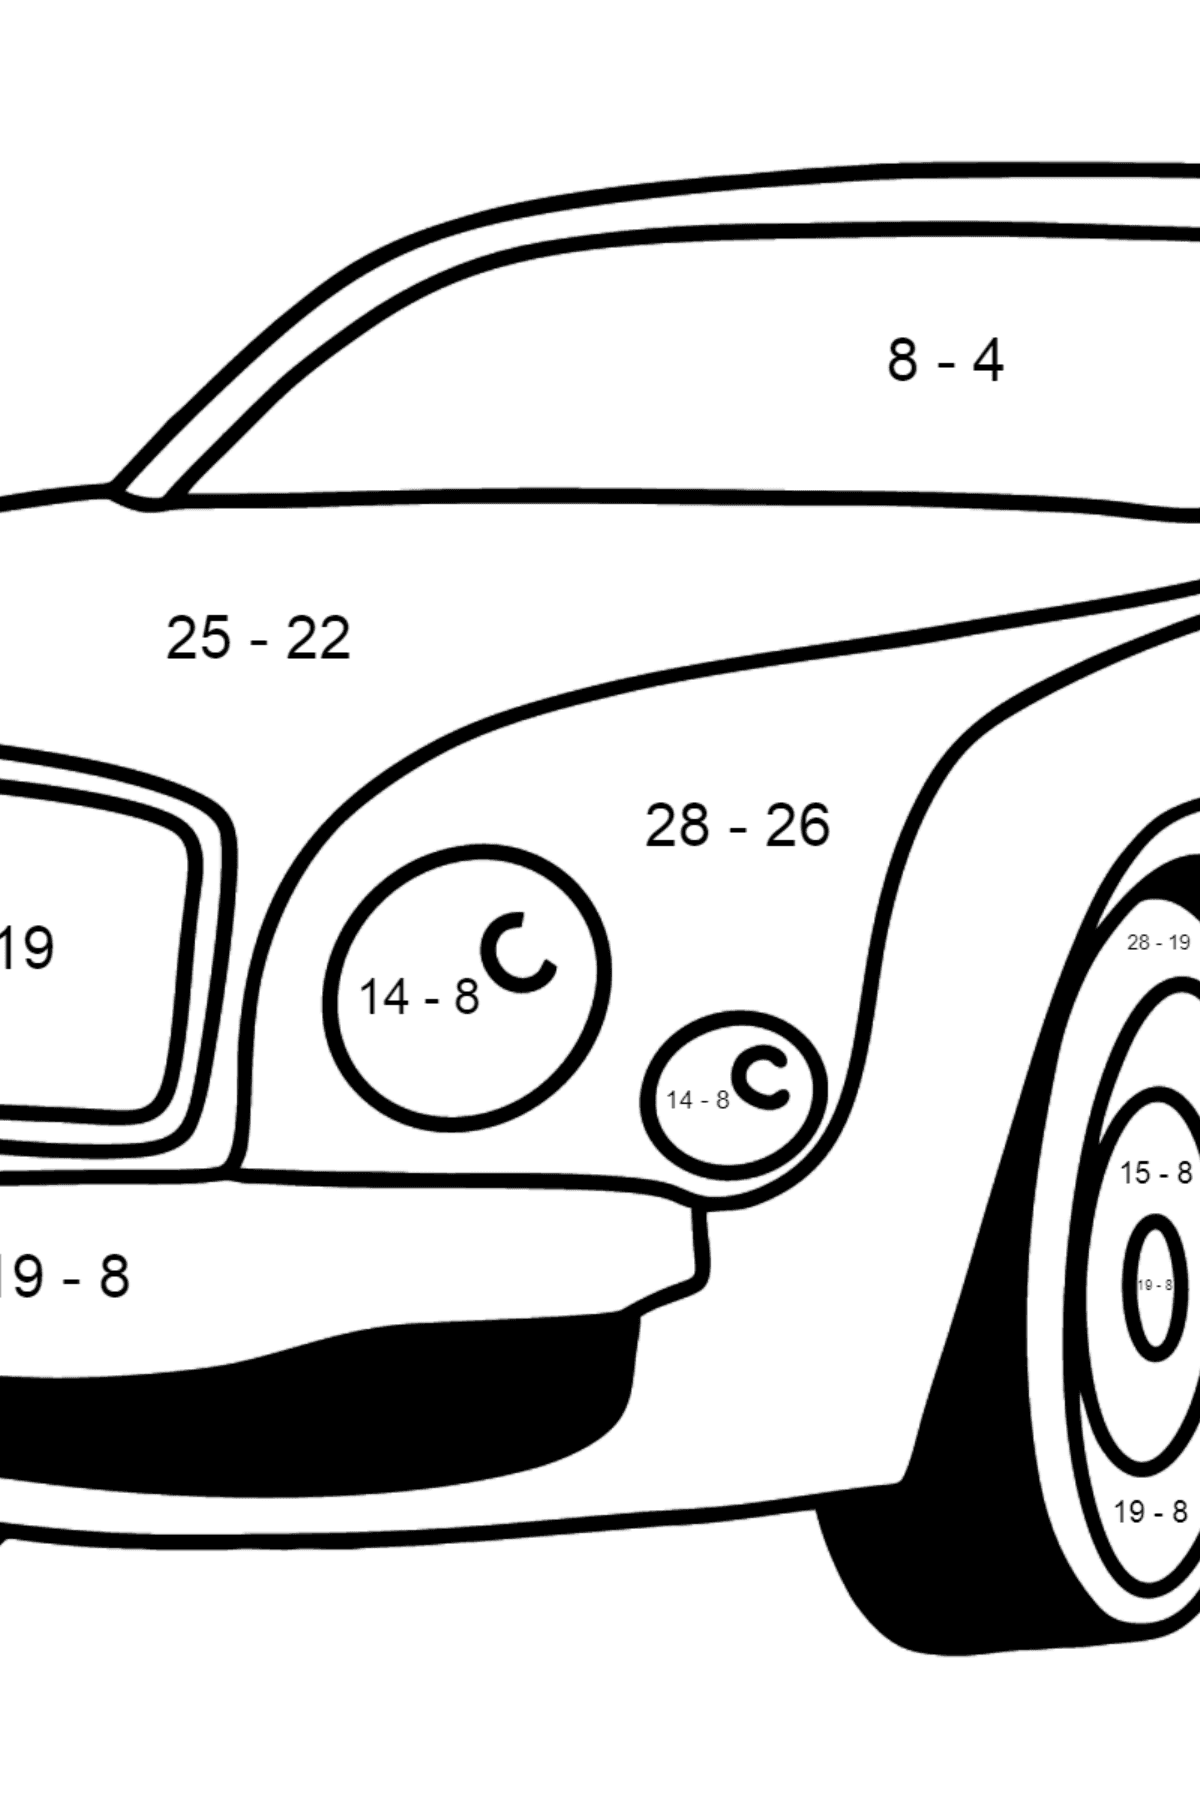 Bentley Car Coloring Page - Math Coloring - Subtraction for Kids